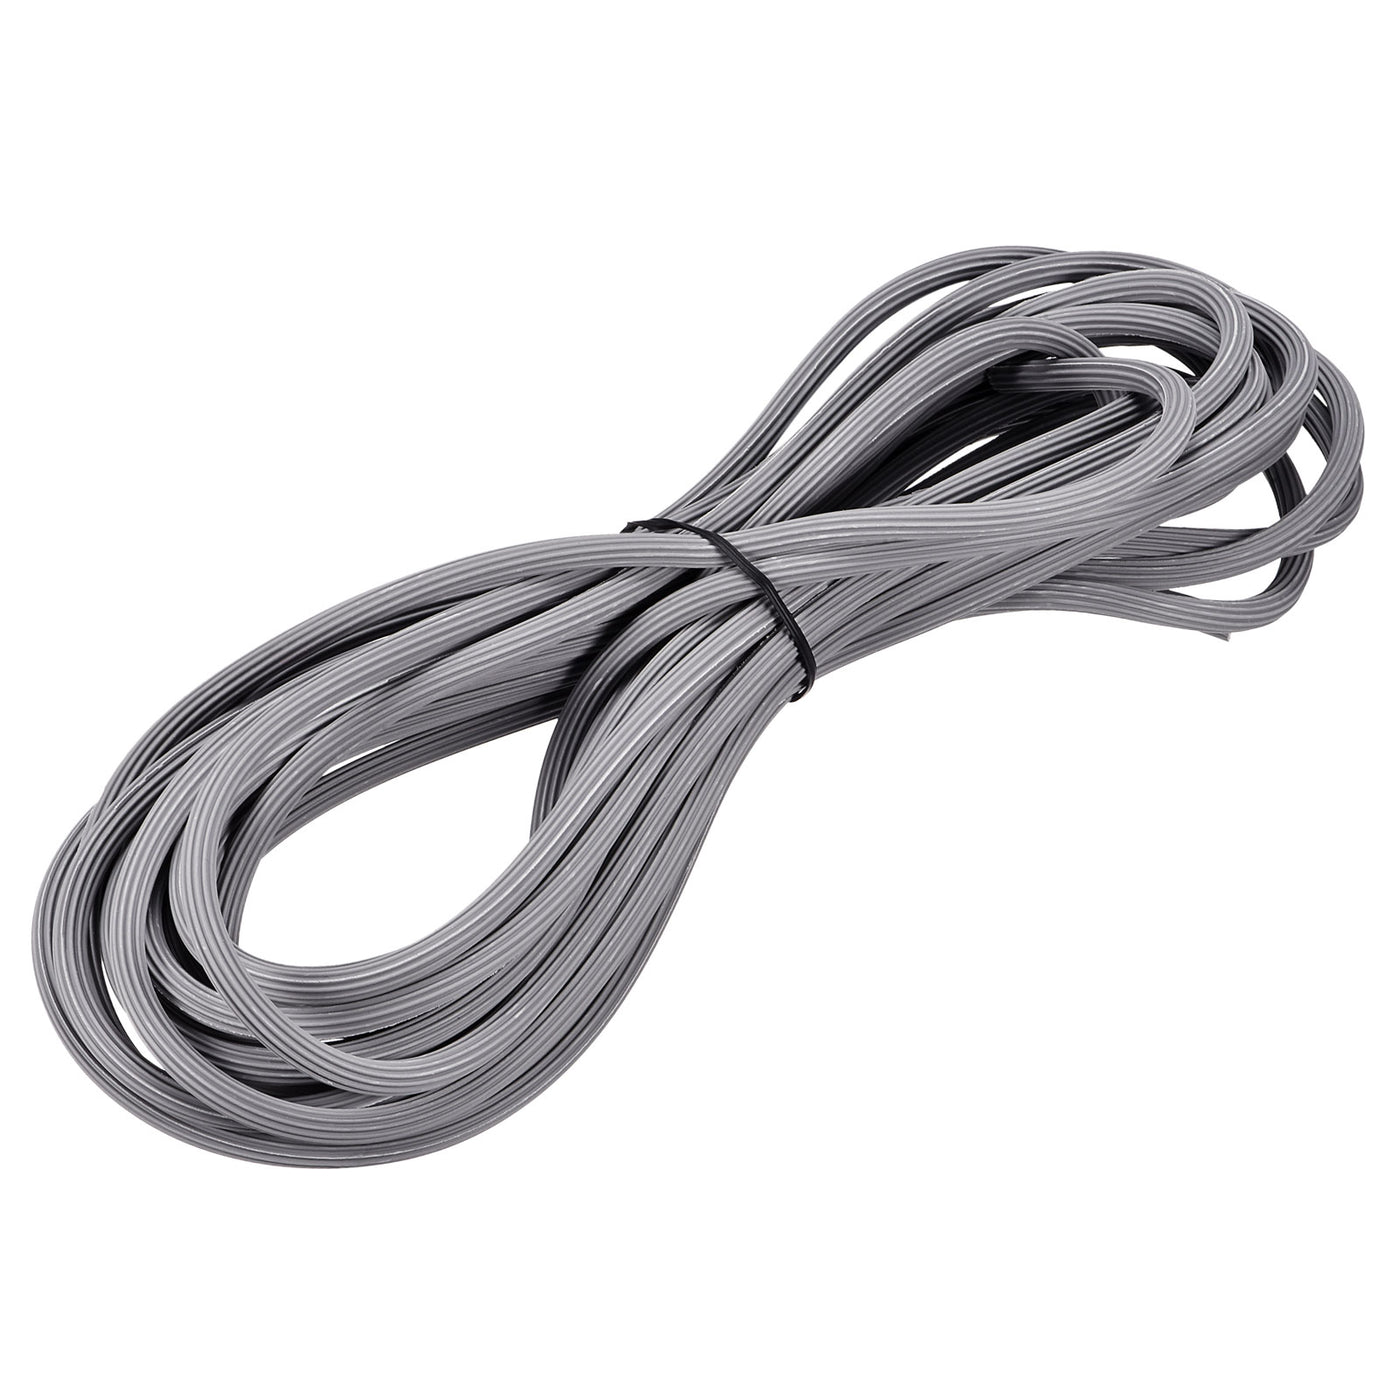 uxcell Uxcell Screen Spline 7.5M/24.61Ft Length PVC Sealing Strip Retainer, 6mm OD Gray